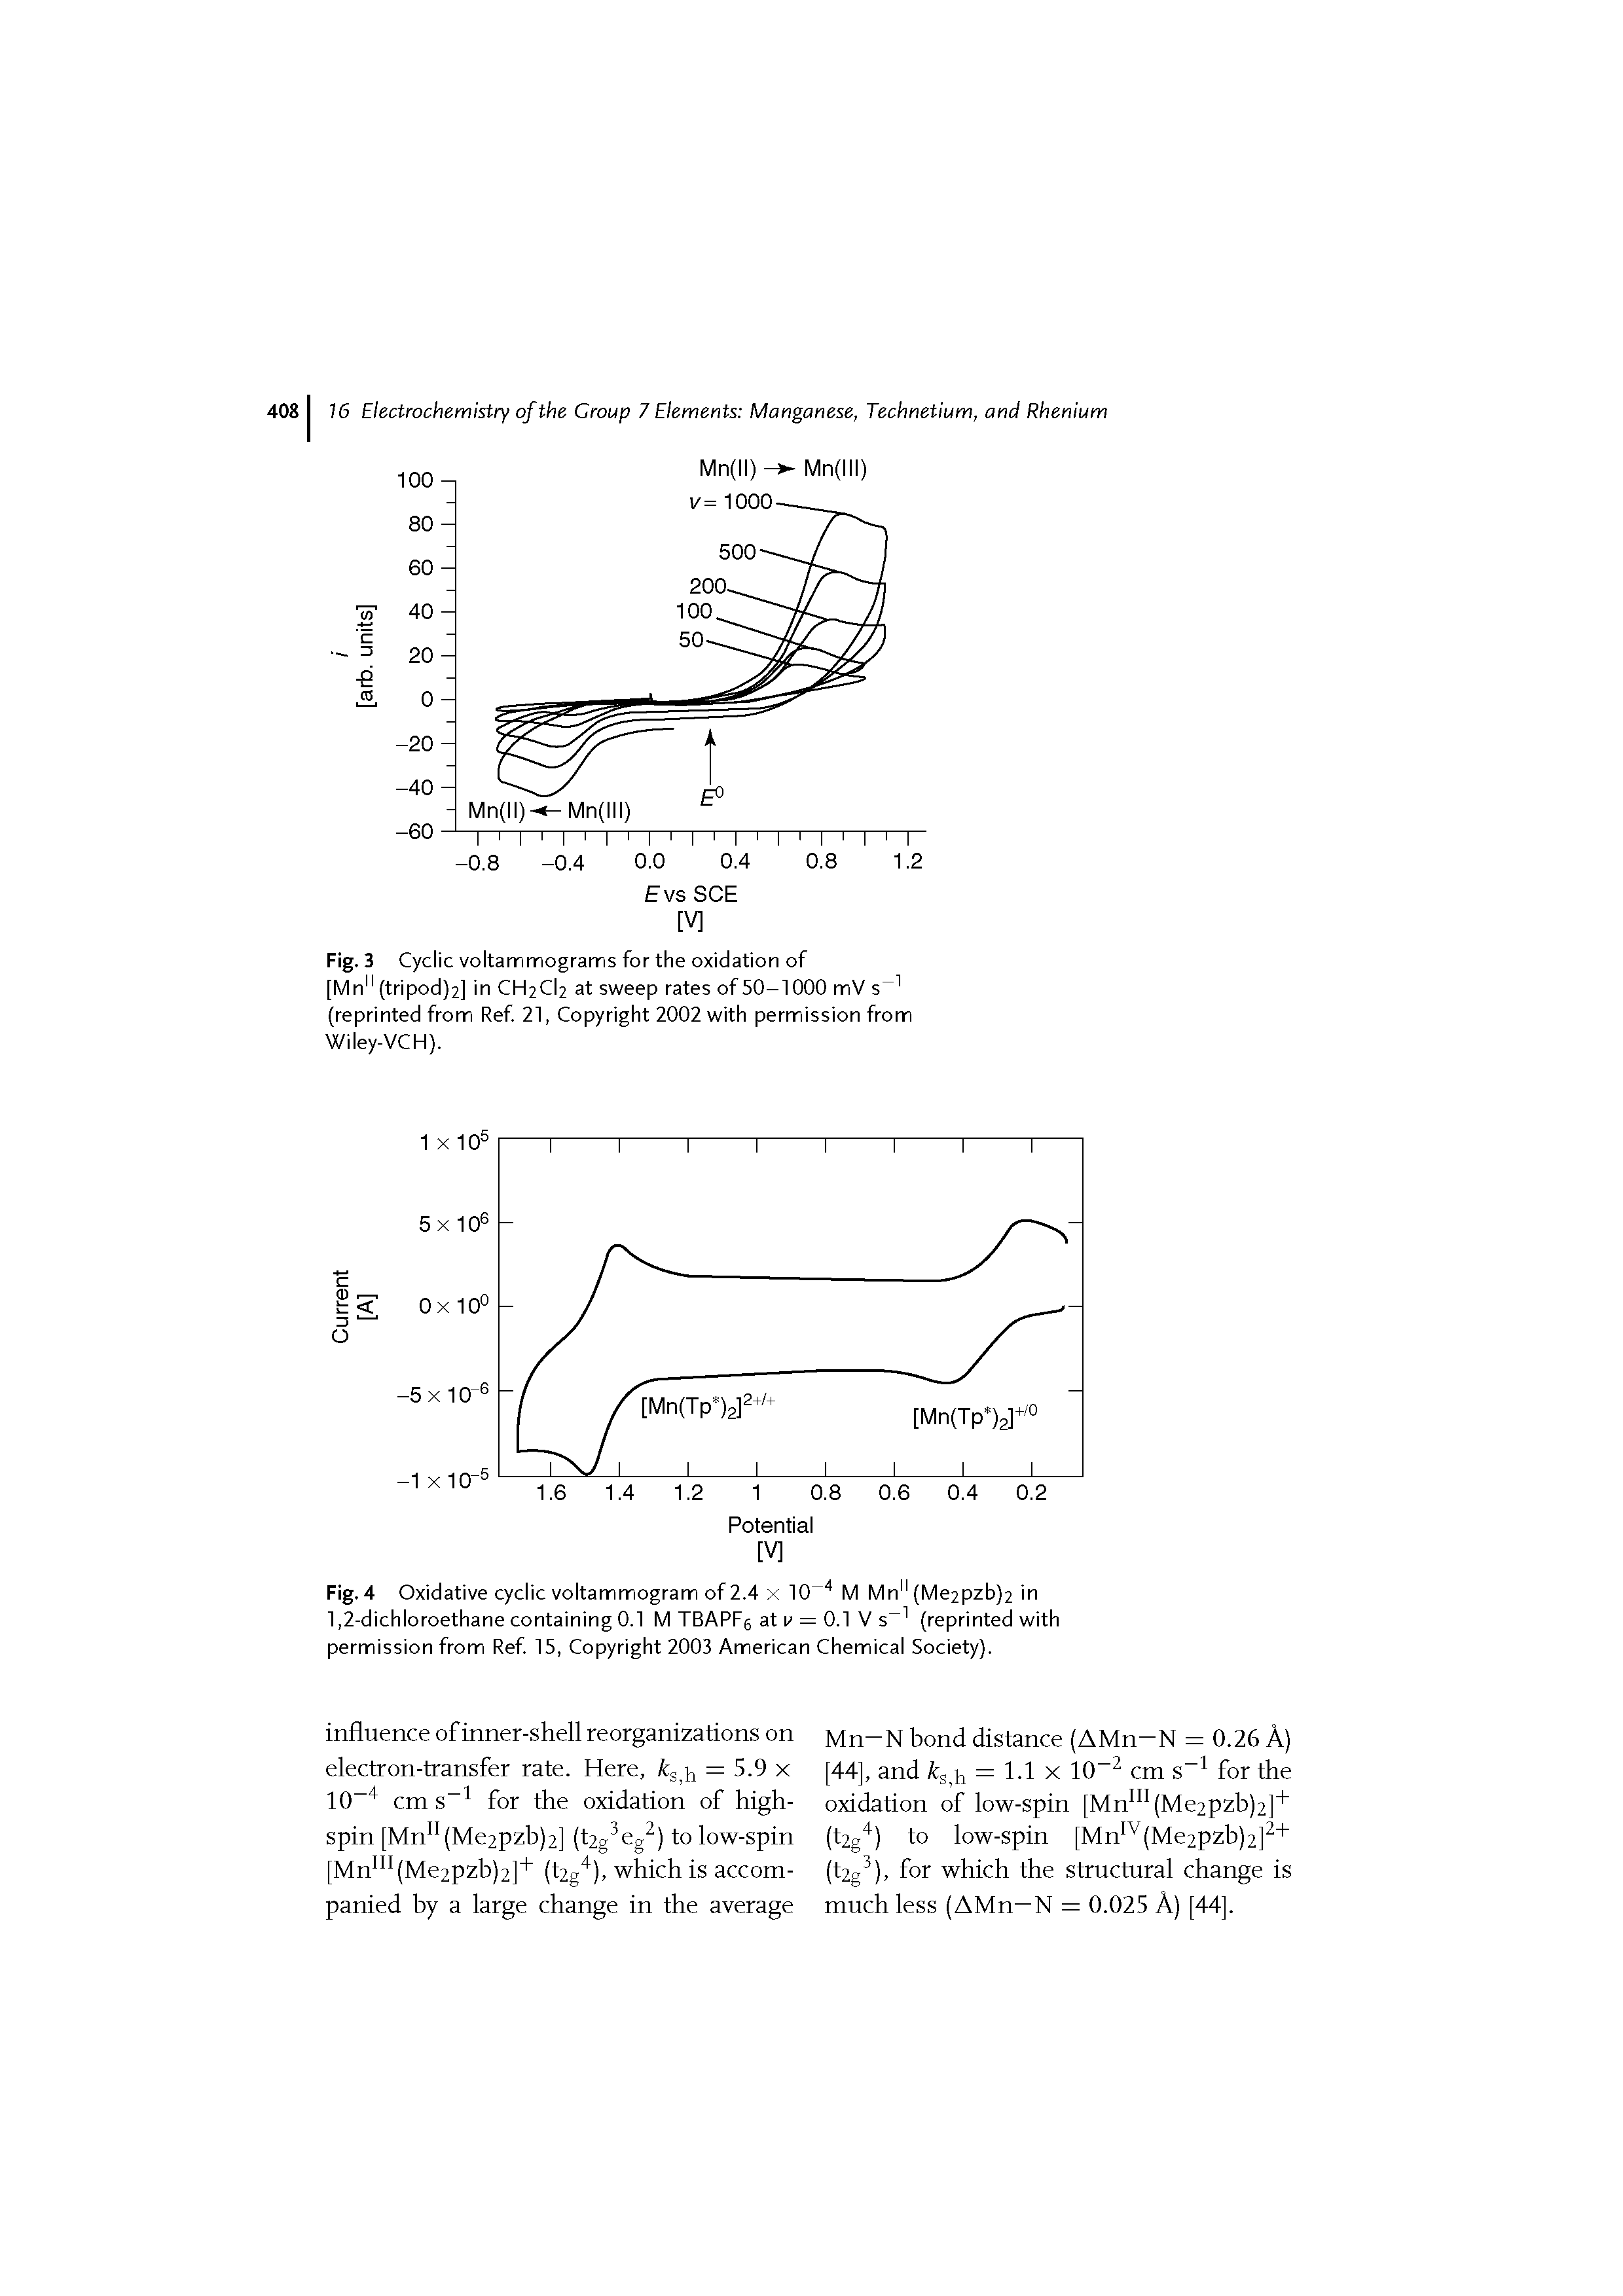 Fig. 4 Oxidative cyclic voltammogram of 2.4 x 10 M Mn" (Me2pzb)2 in 1,2-dichloroethane containing 0.1 M TBAPFg at r = 0.1 V s (reprinted with permission from Ref 15, Copyright 2003 American Chemical Society).